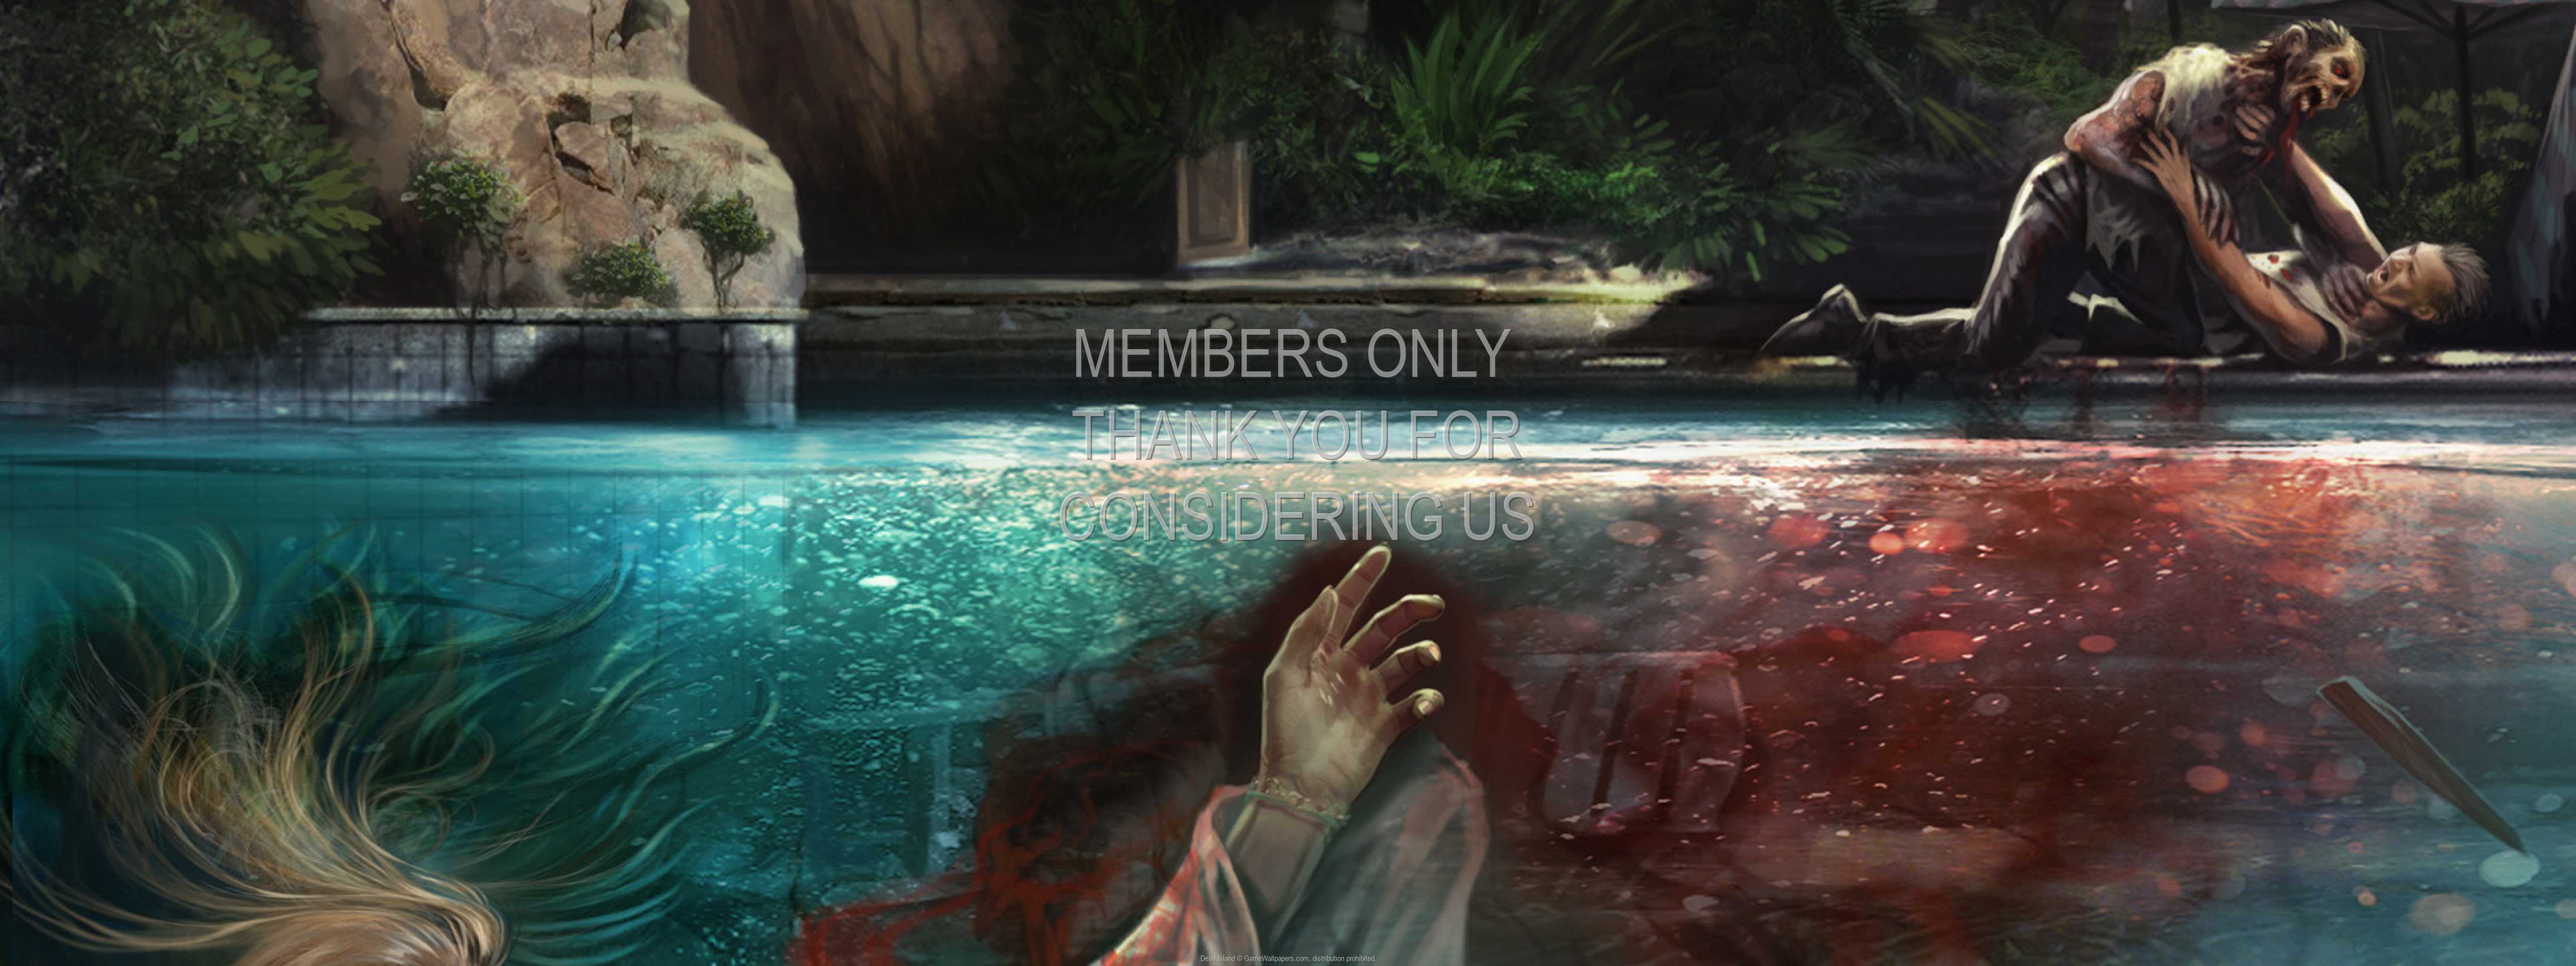 Dead Island 1080p%20Horizontal Mobile wallpaper or background 03